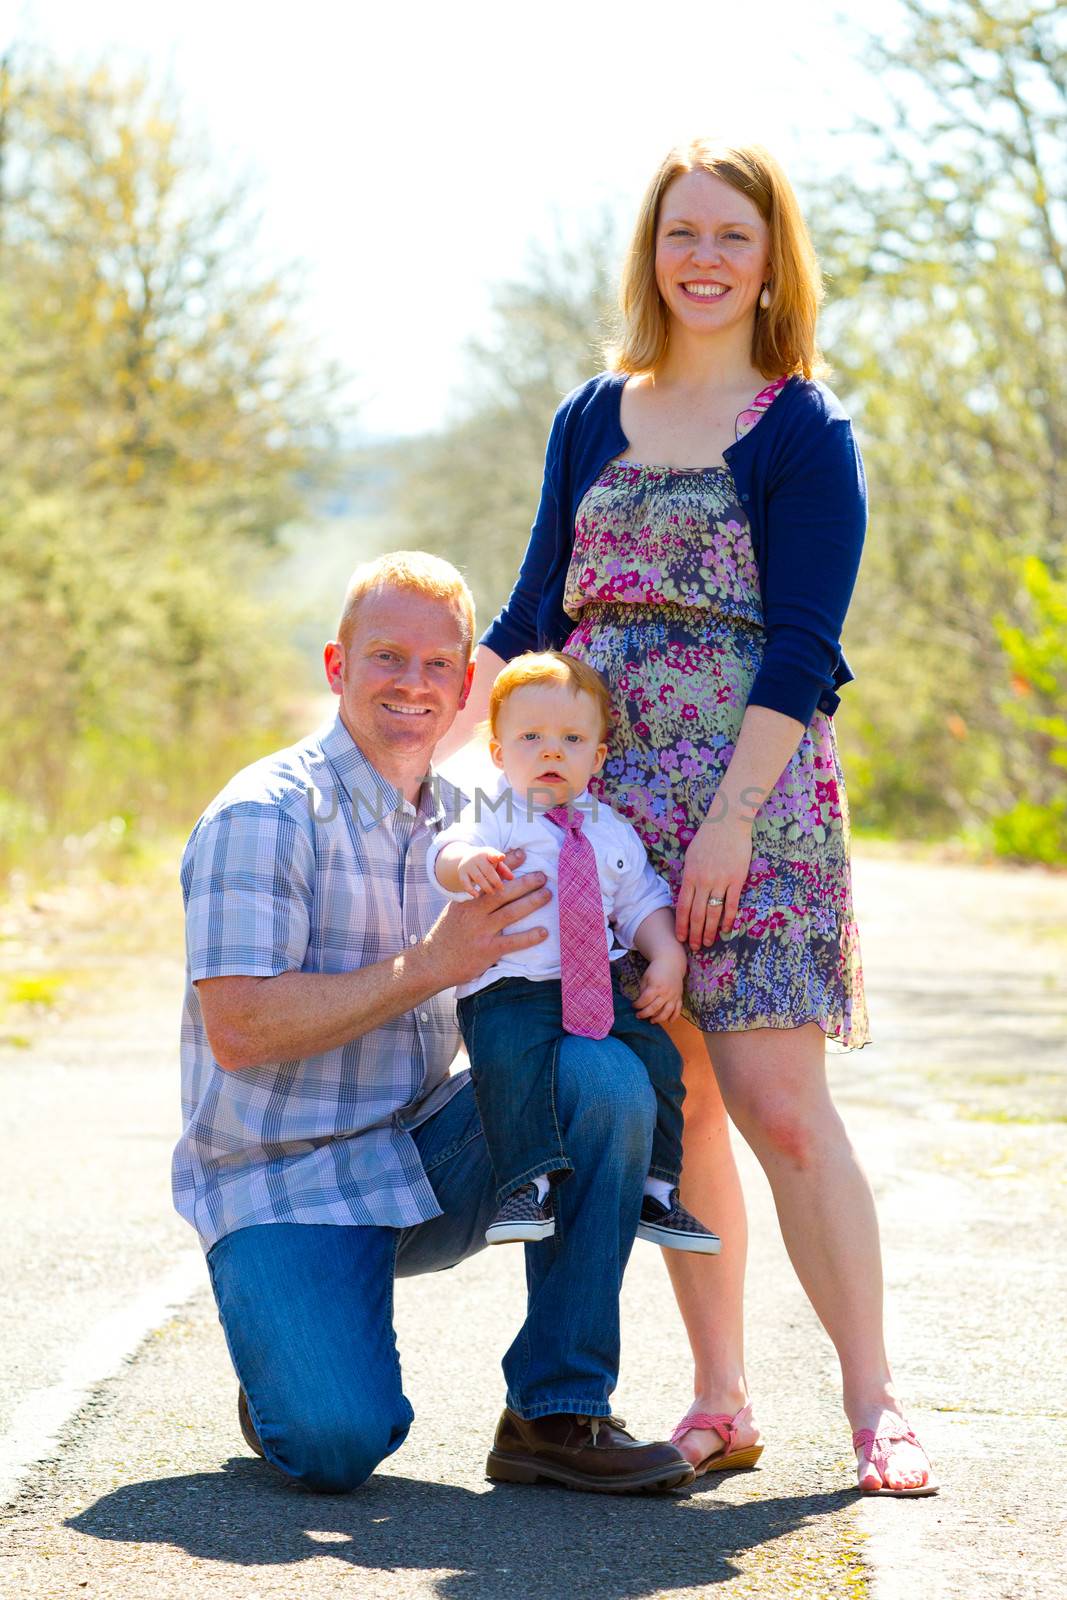 A family of three people together outdoors wearing nice clothes in this simple portrait.